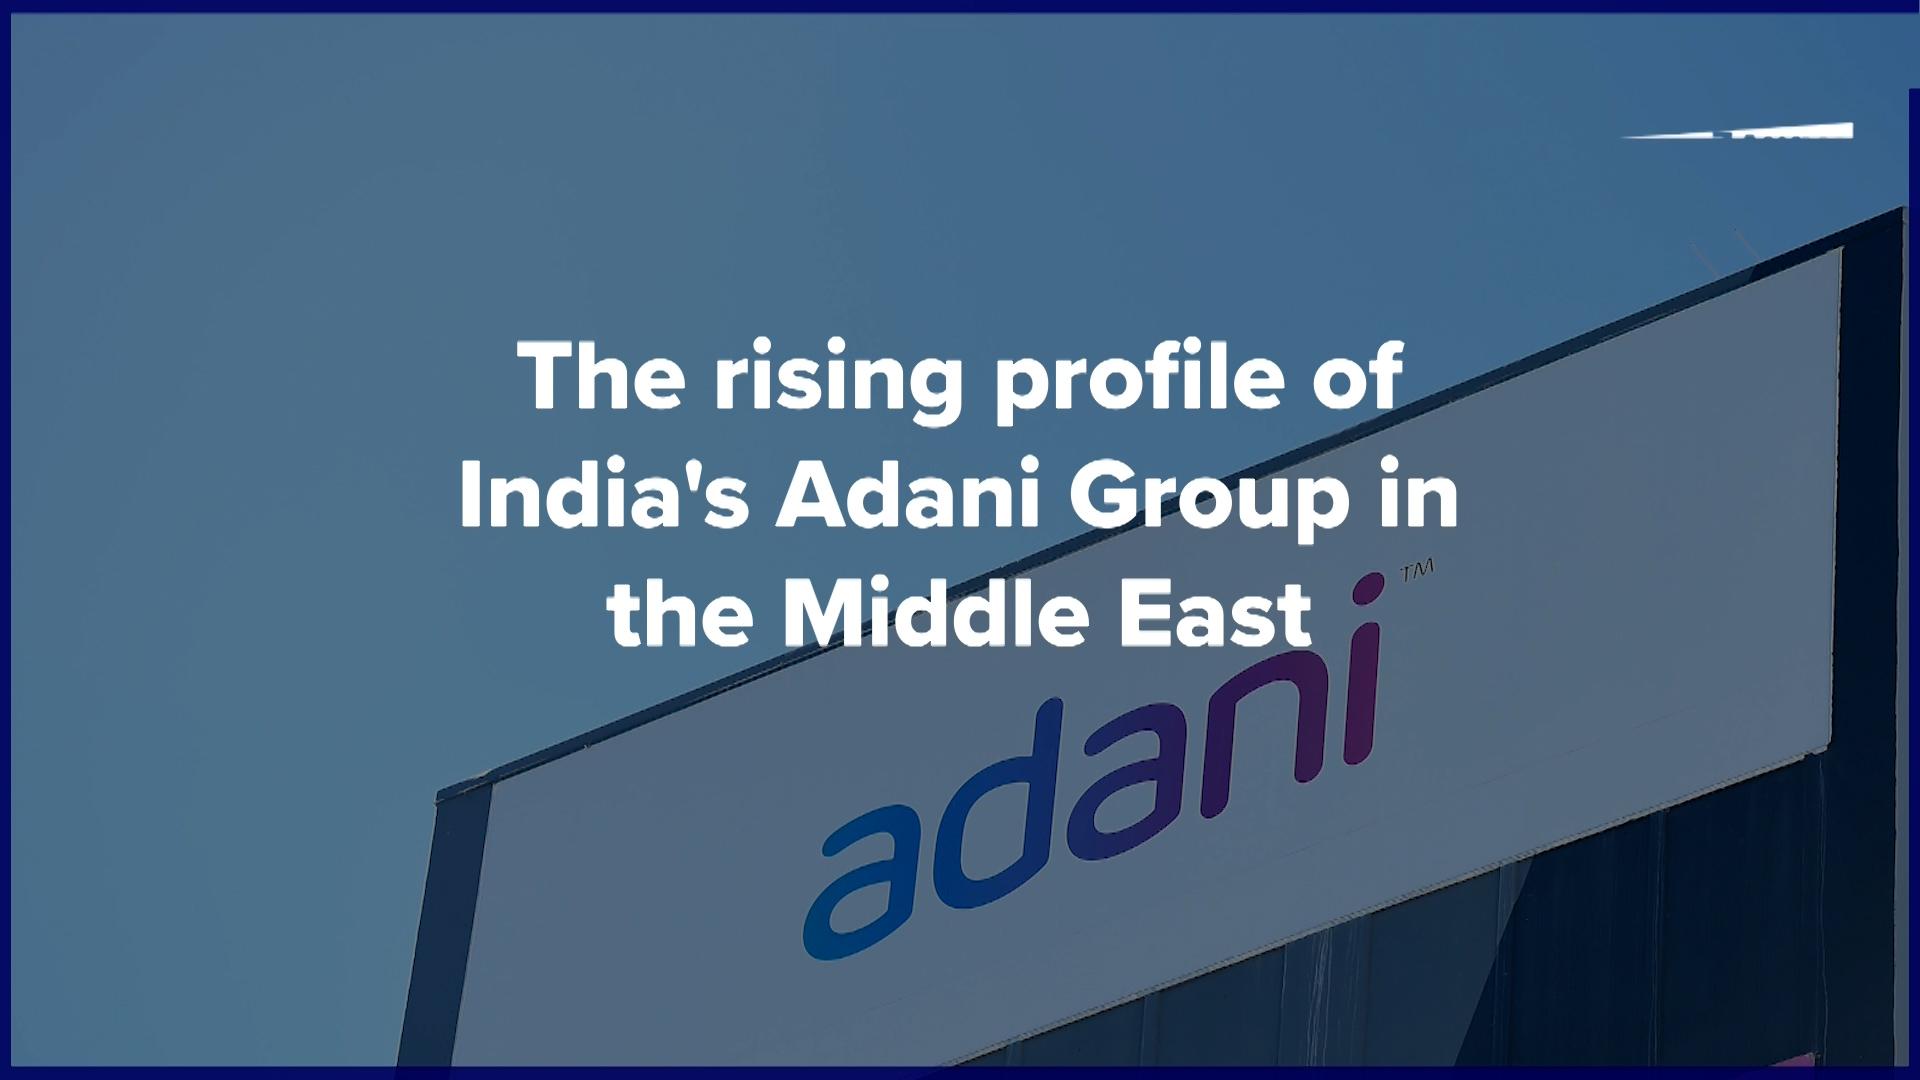 VIDEO: The rising profile of India's Adani Group in the Middle East